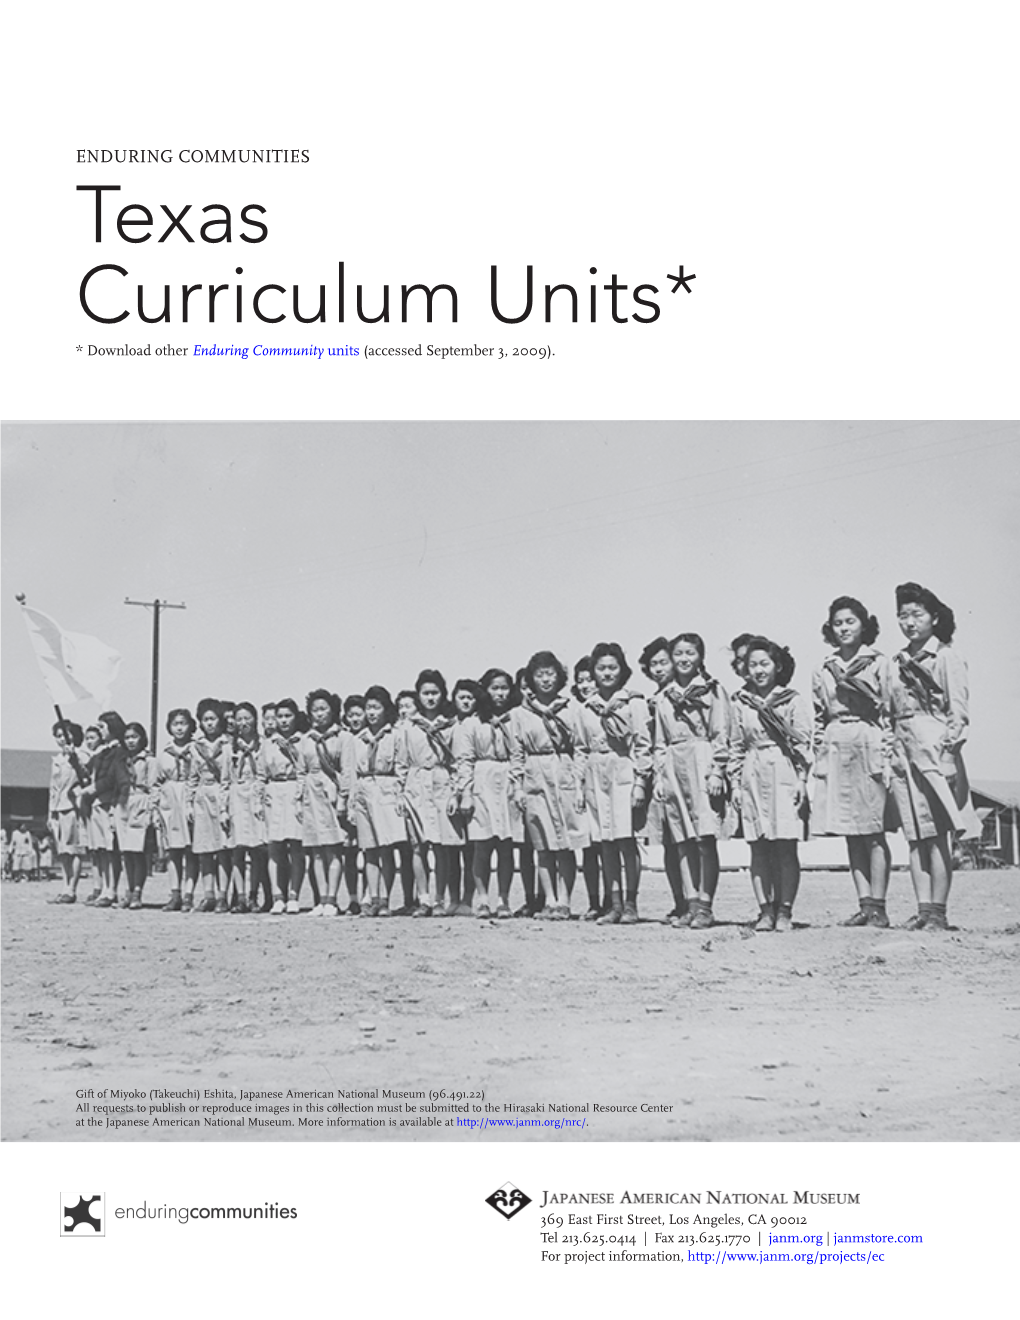 Texas Curriculum Units* * Download Other Enduring Community Units (Accessed September 3, 2009)